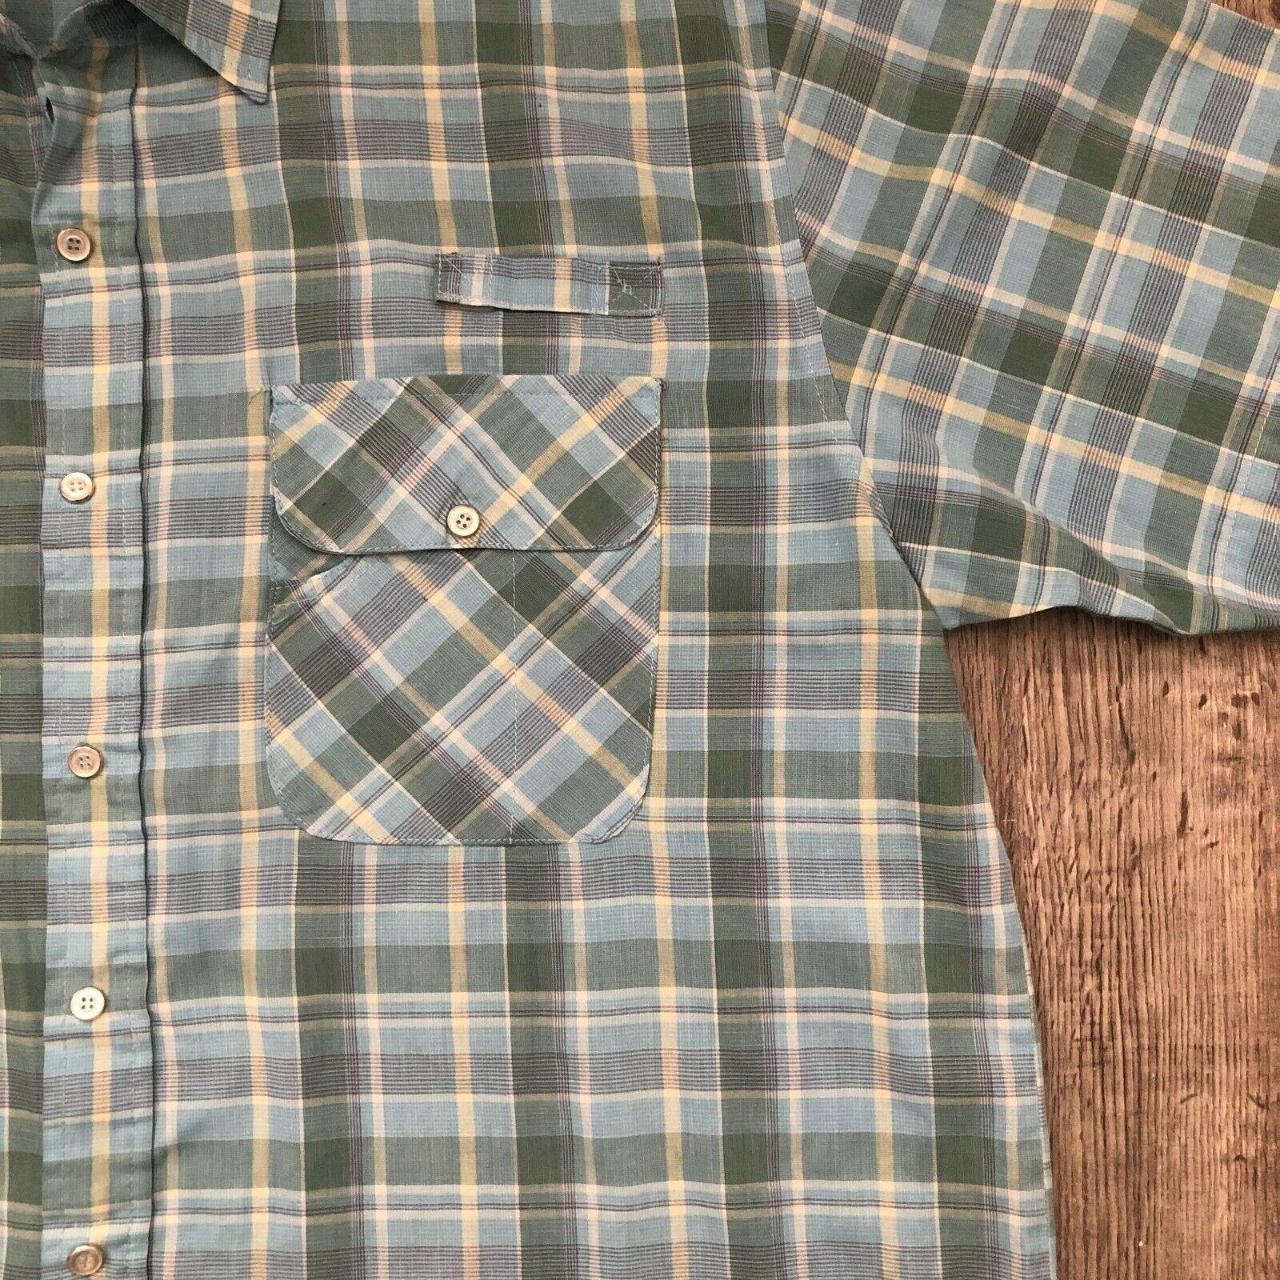 Haband Men's Blue and Green Shirt (2)